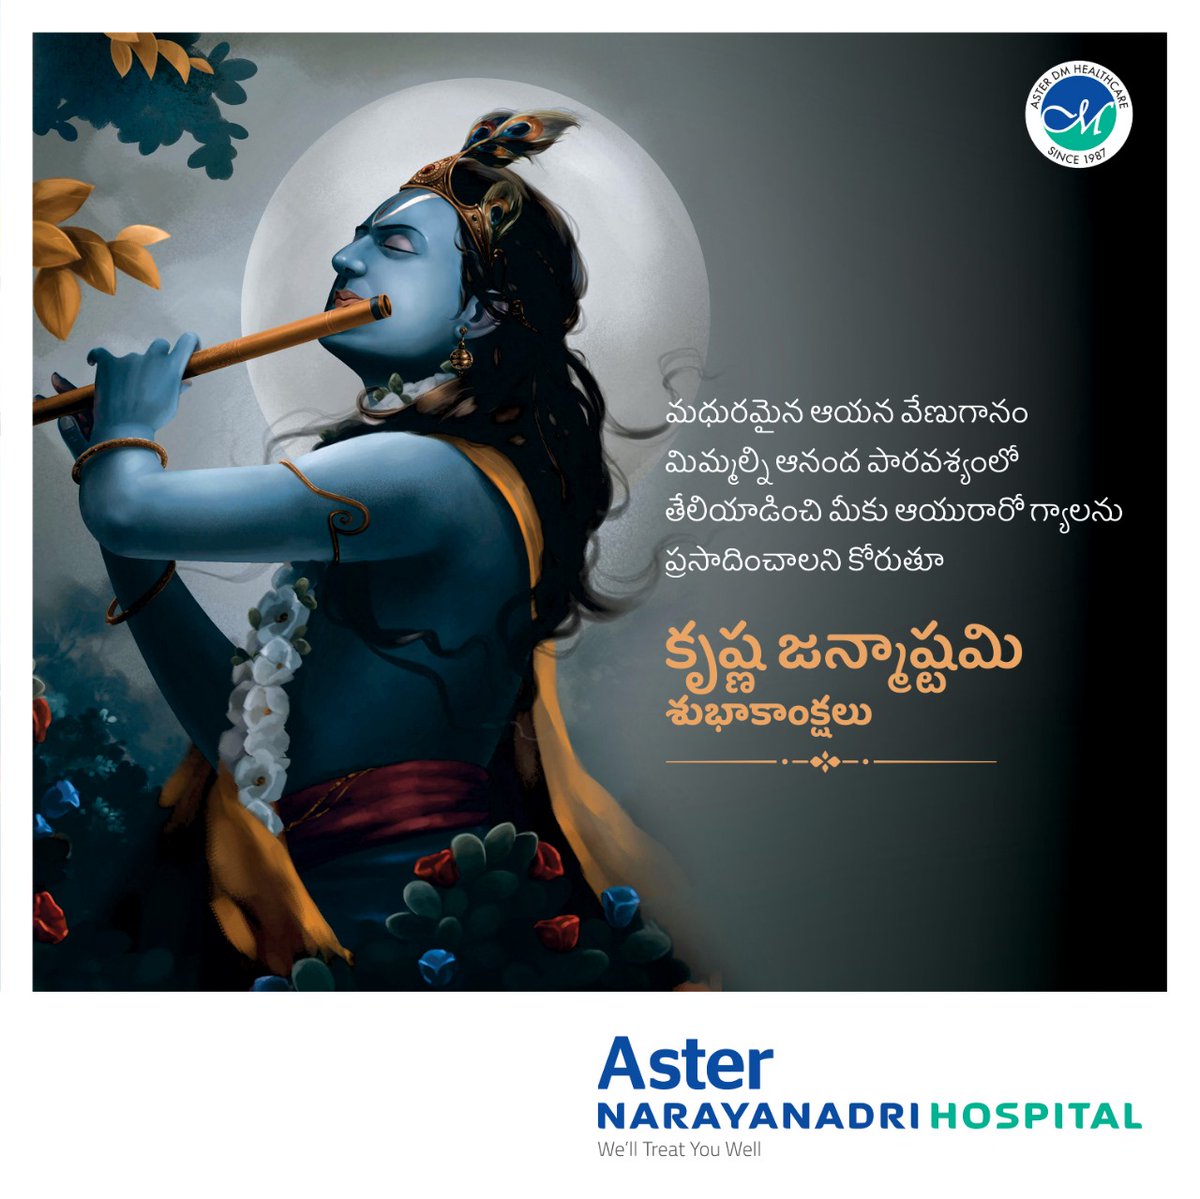 May the birth of Lord Krishna usher health, peace and joy into your life. Aster Narayanadri wishes you a Happy Janmashtami.
#asternarayanadrihospital #AsterHospitals #Aster #HappyJanmashtami #janmashtami2023 #festival2023 #traditional